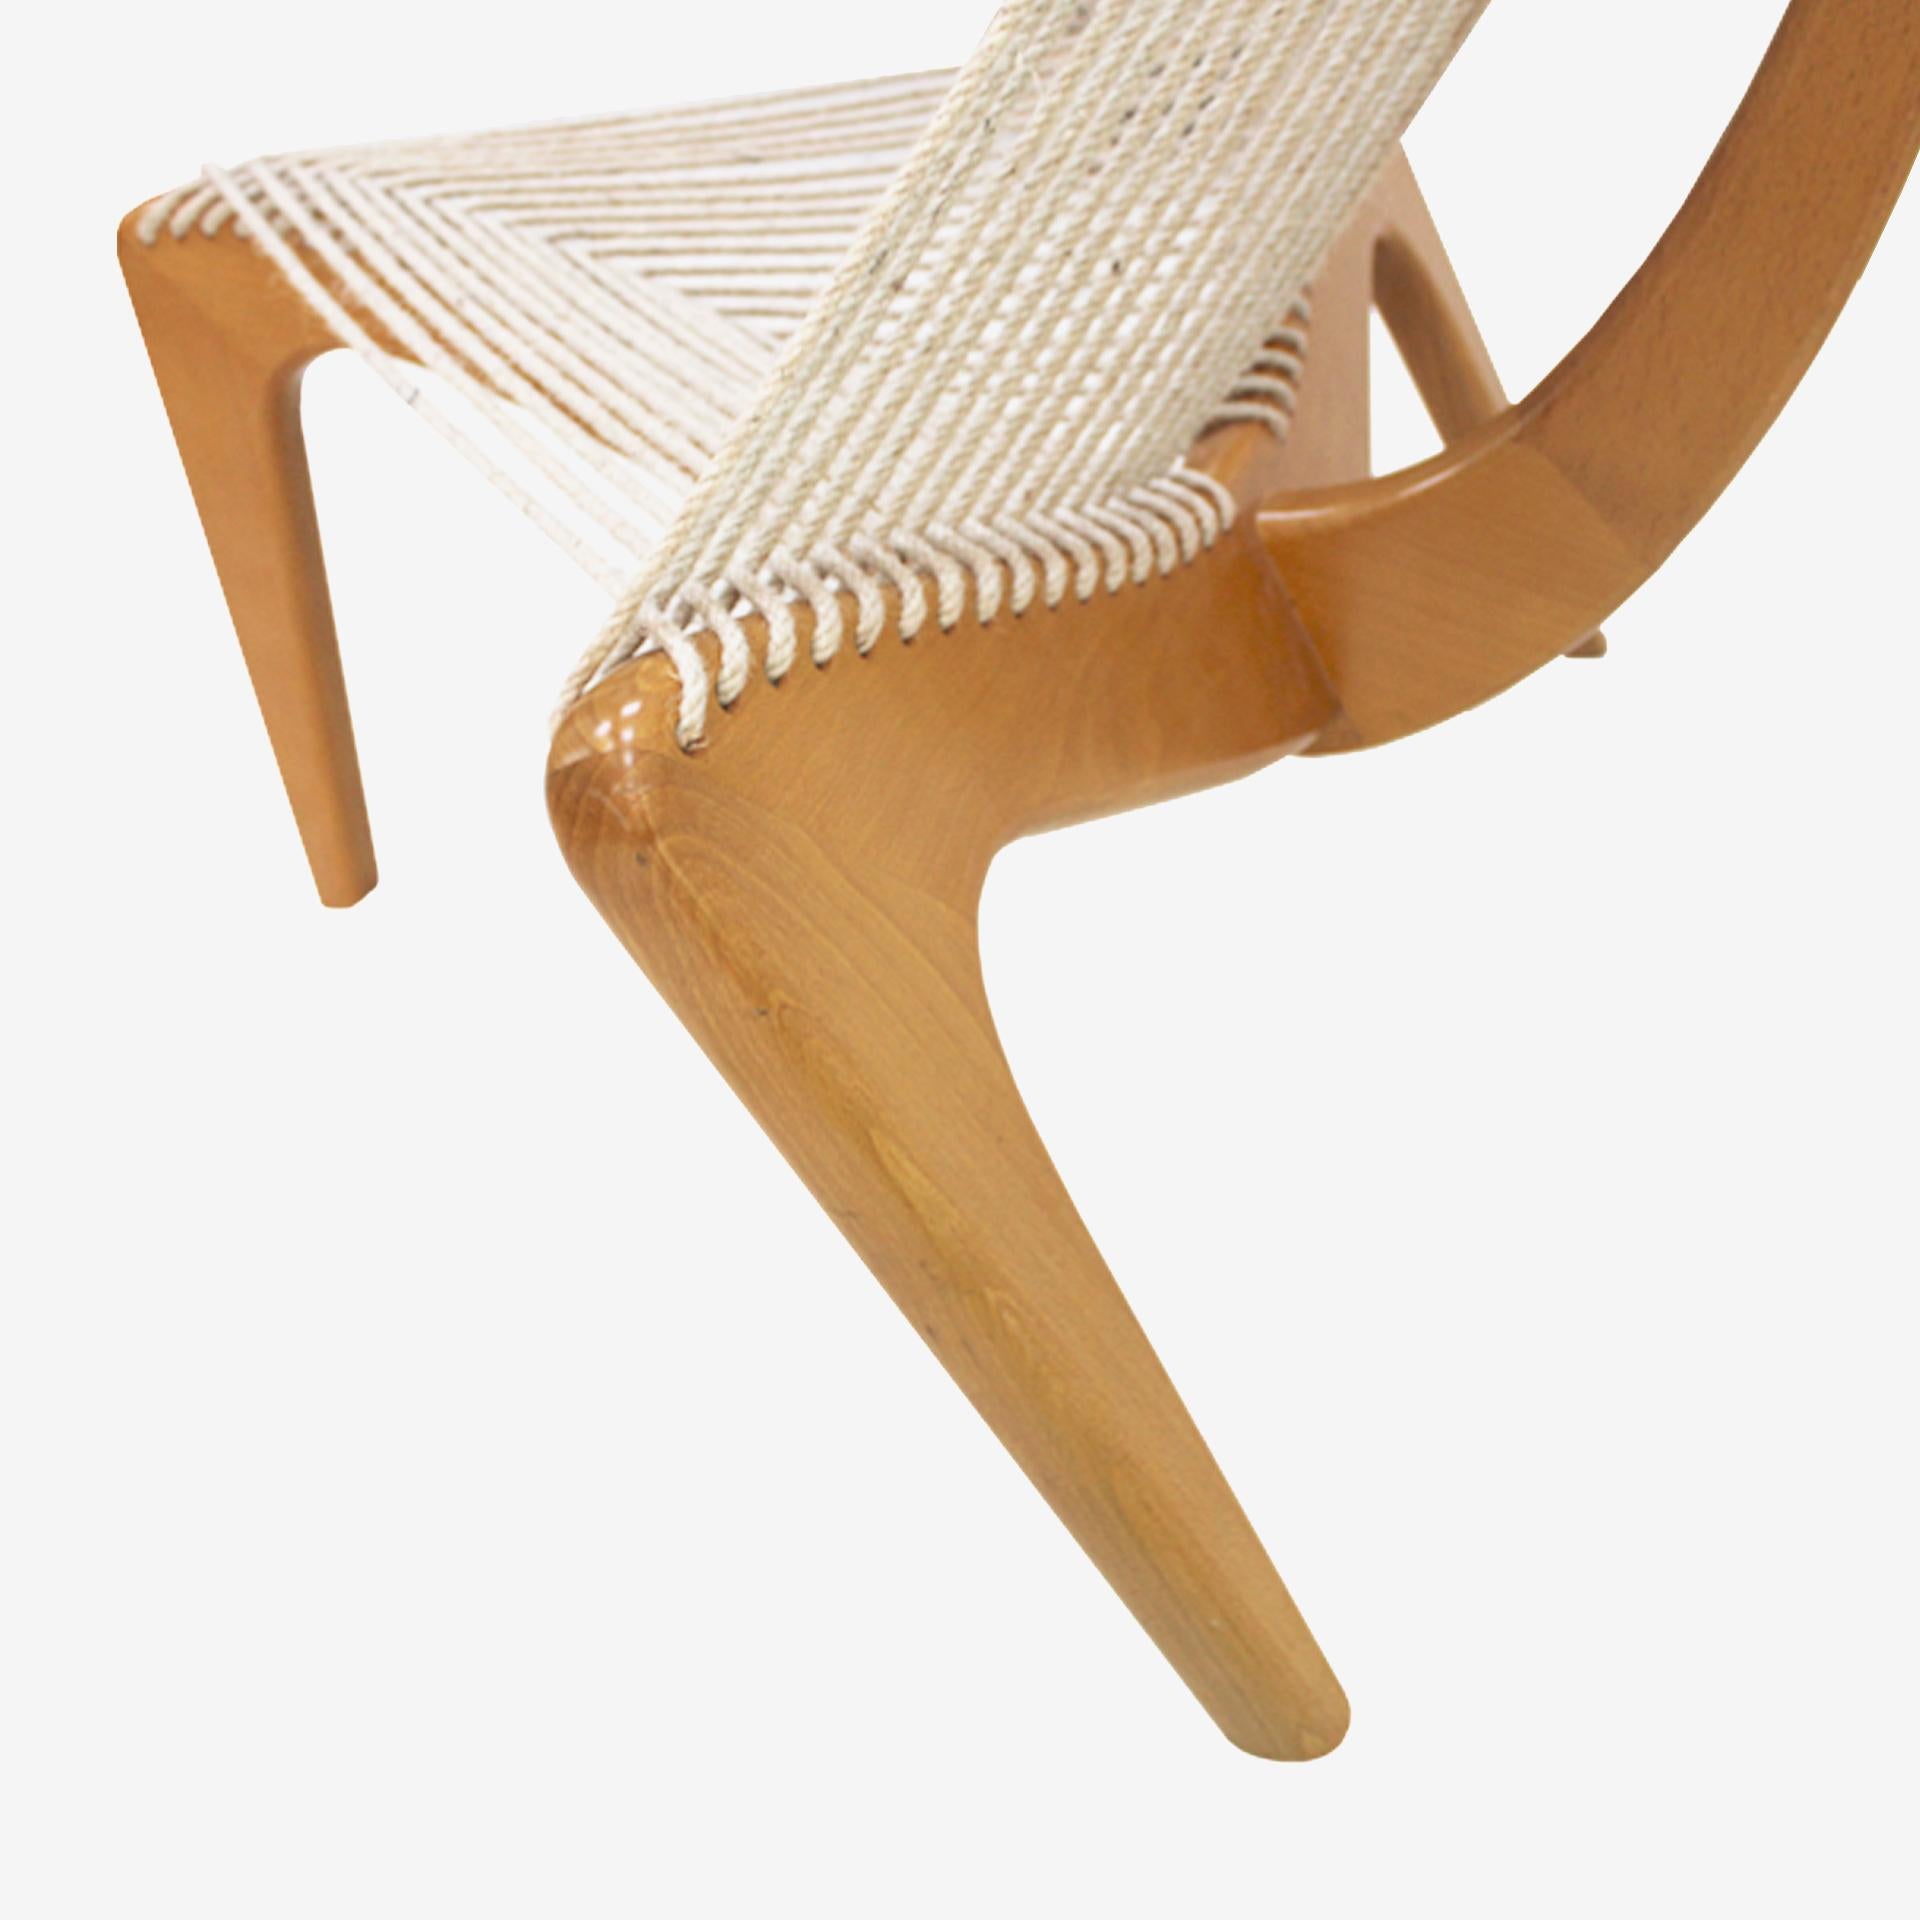 Mid century Jørgen Høvelskov Rope Wood and String Sculpture Harp Chair, Denmark In Good Condition For Sale In Ibiza, Spain